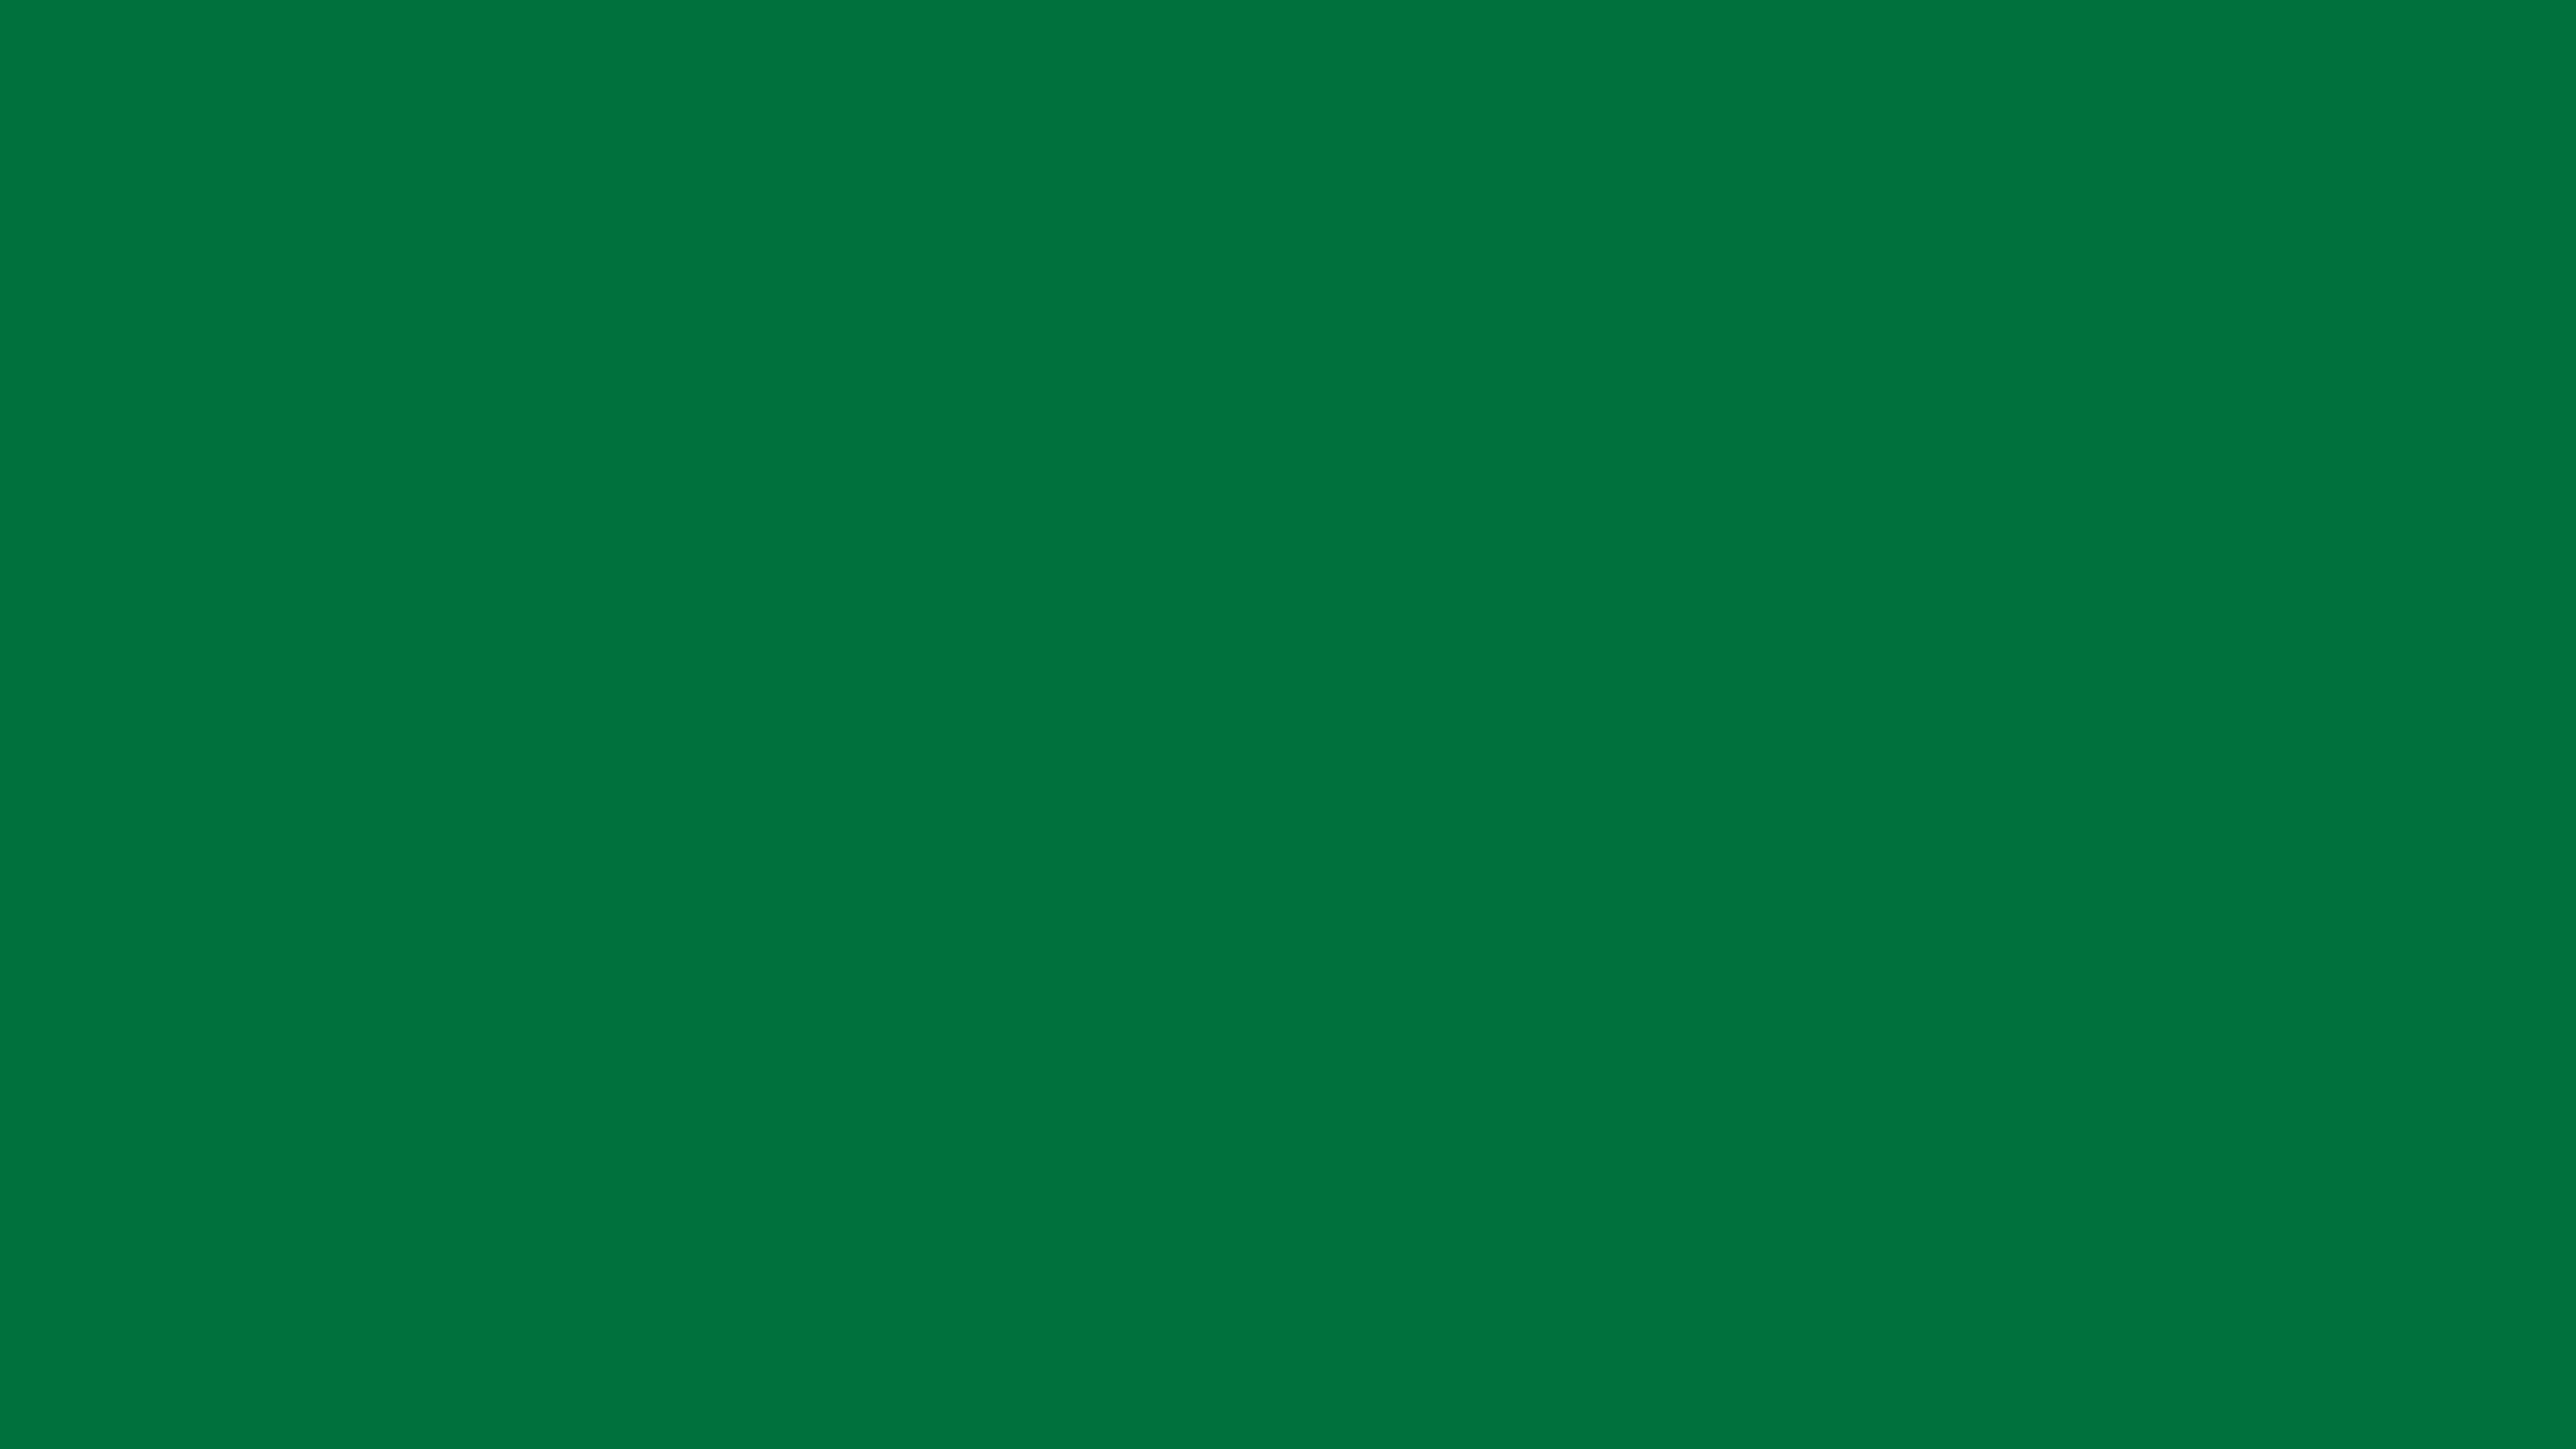 7680x4320 Dartmouth Green Solid Color Background